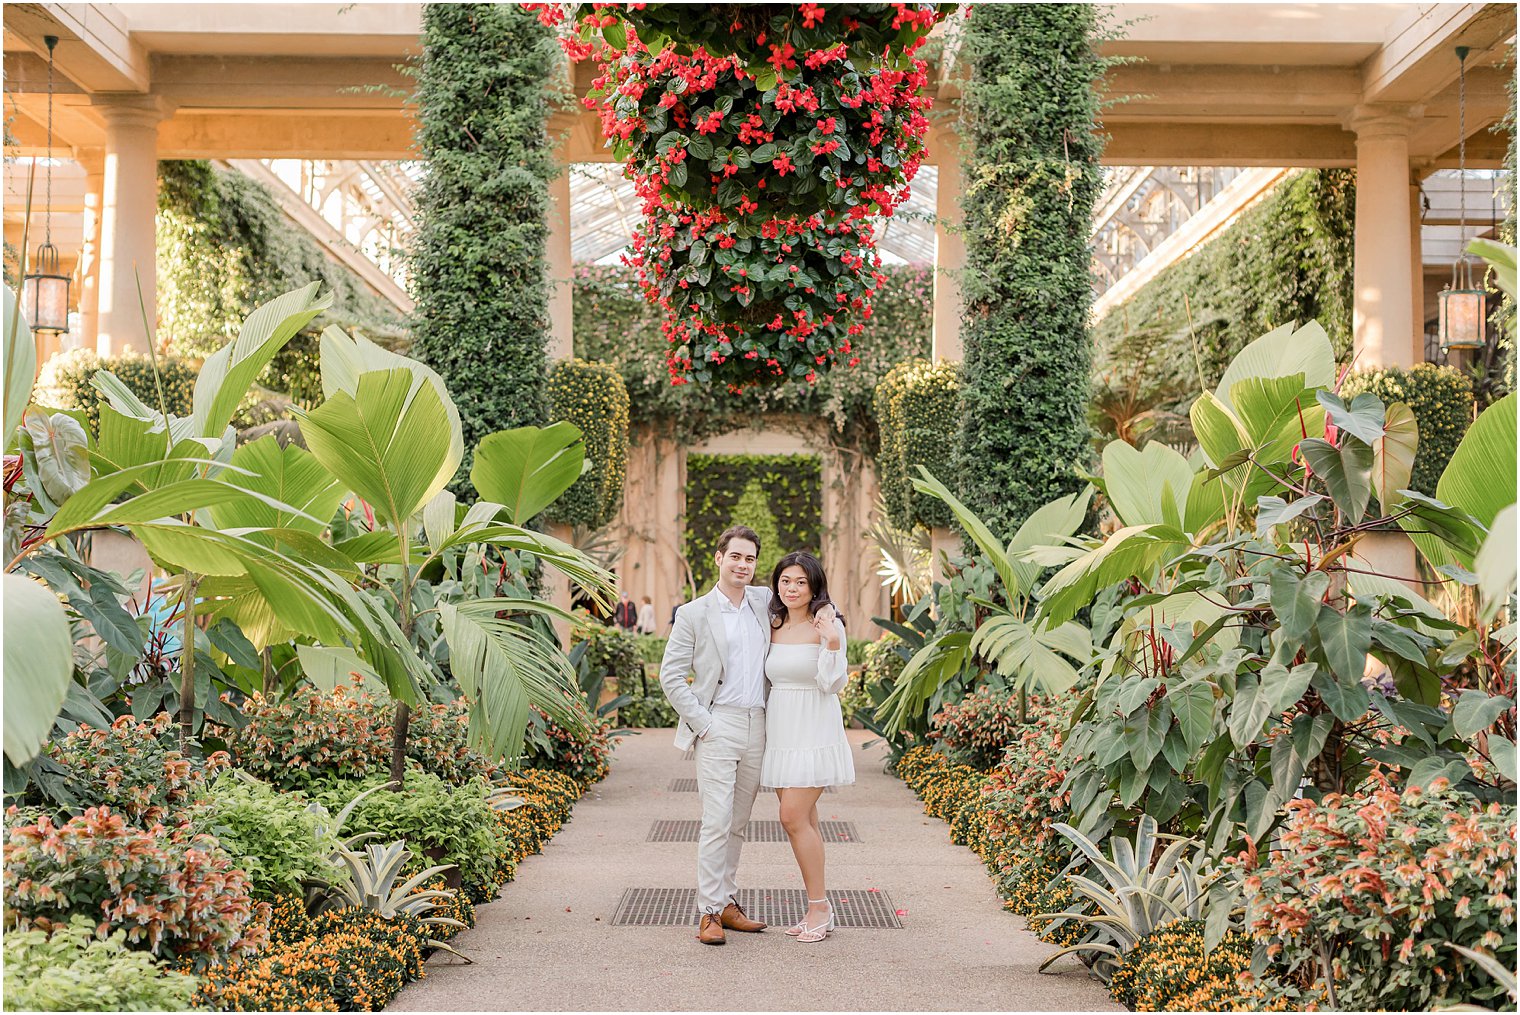 engaged couple walks through conservatory of plants at Longwood Gardens